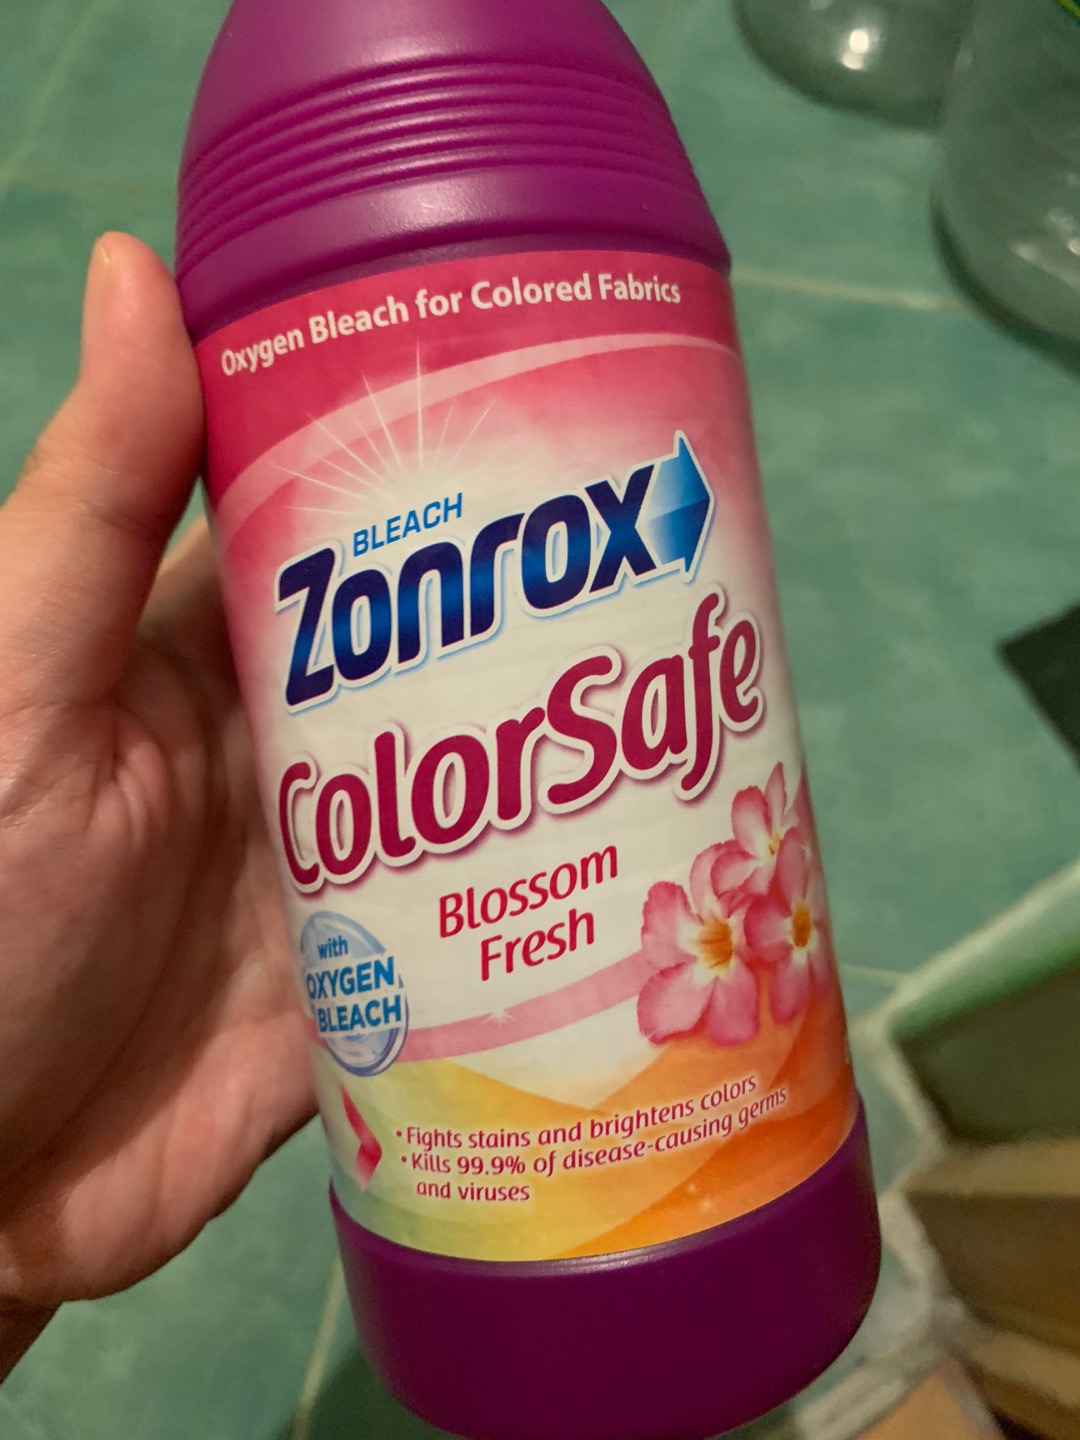 Zonrox Bleach Colorsafe Blossom Fresh | Shopee Philippines